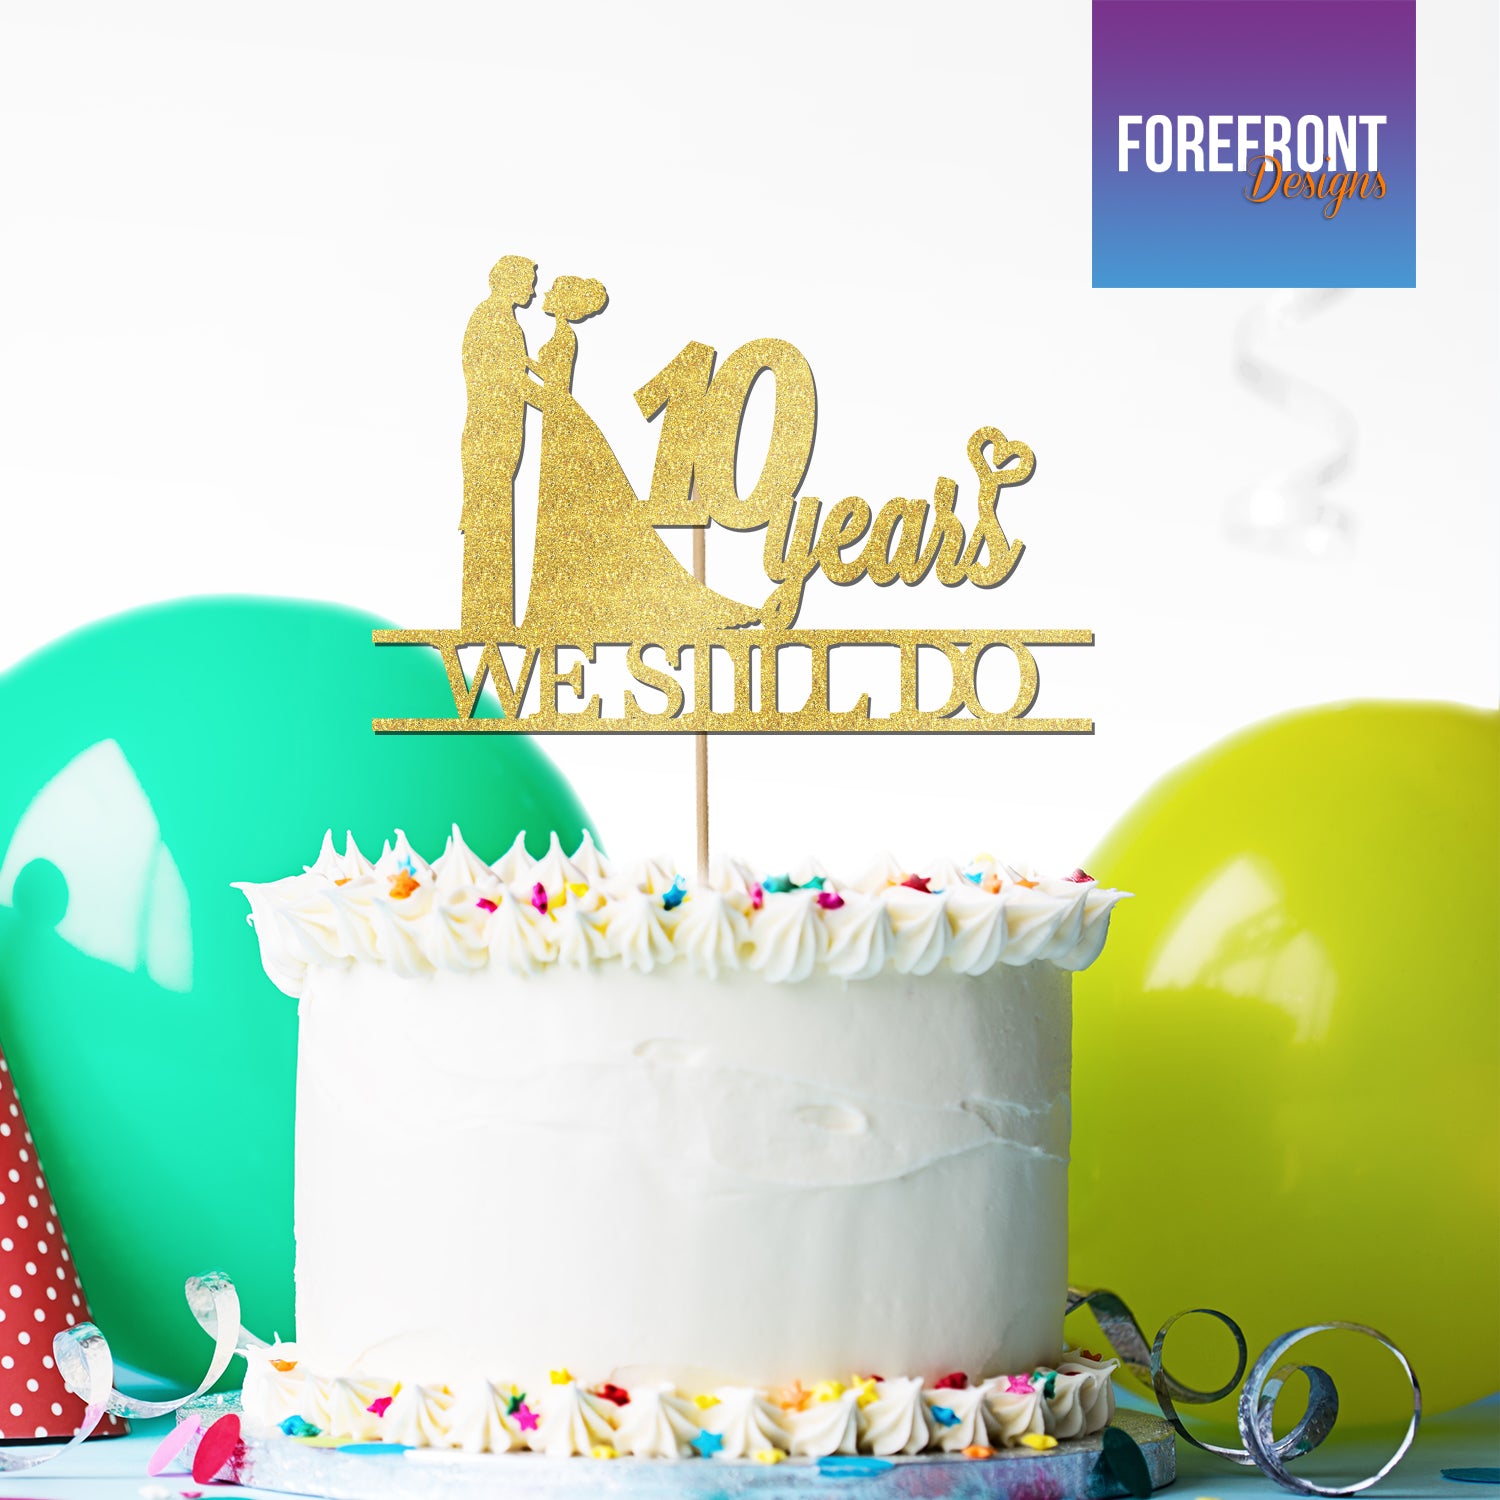 Top funny anniversary cakes designs by yummycake - Issuu